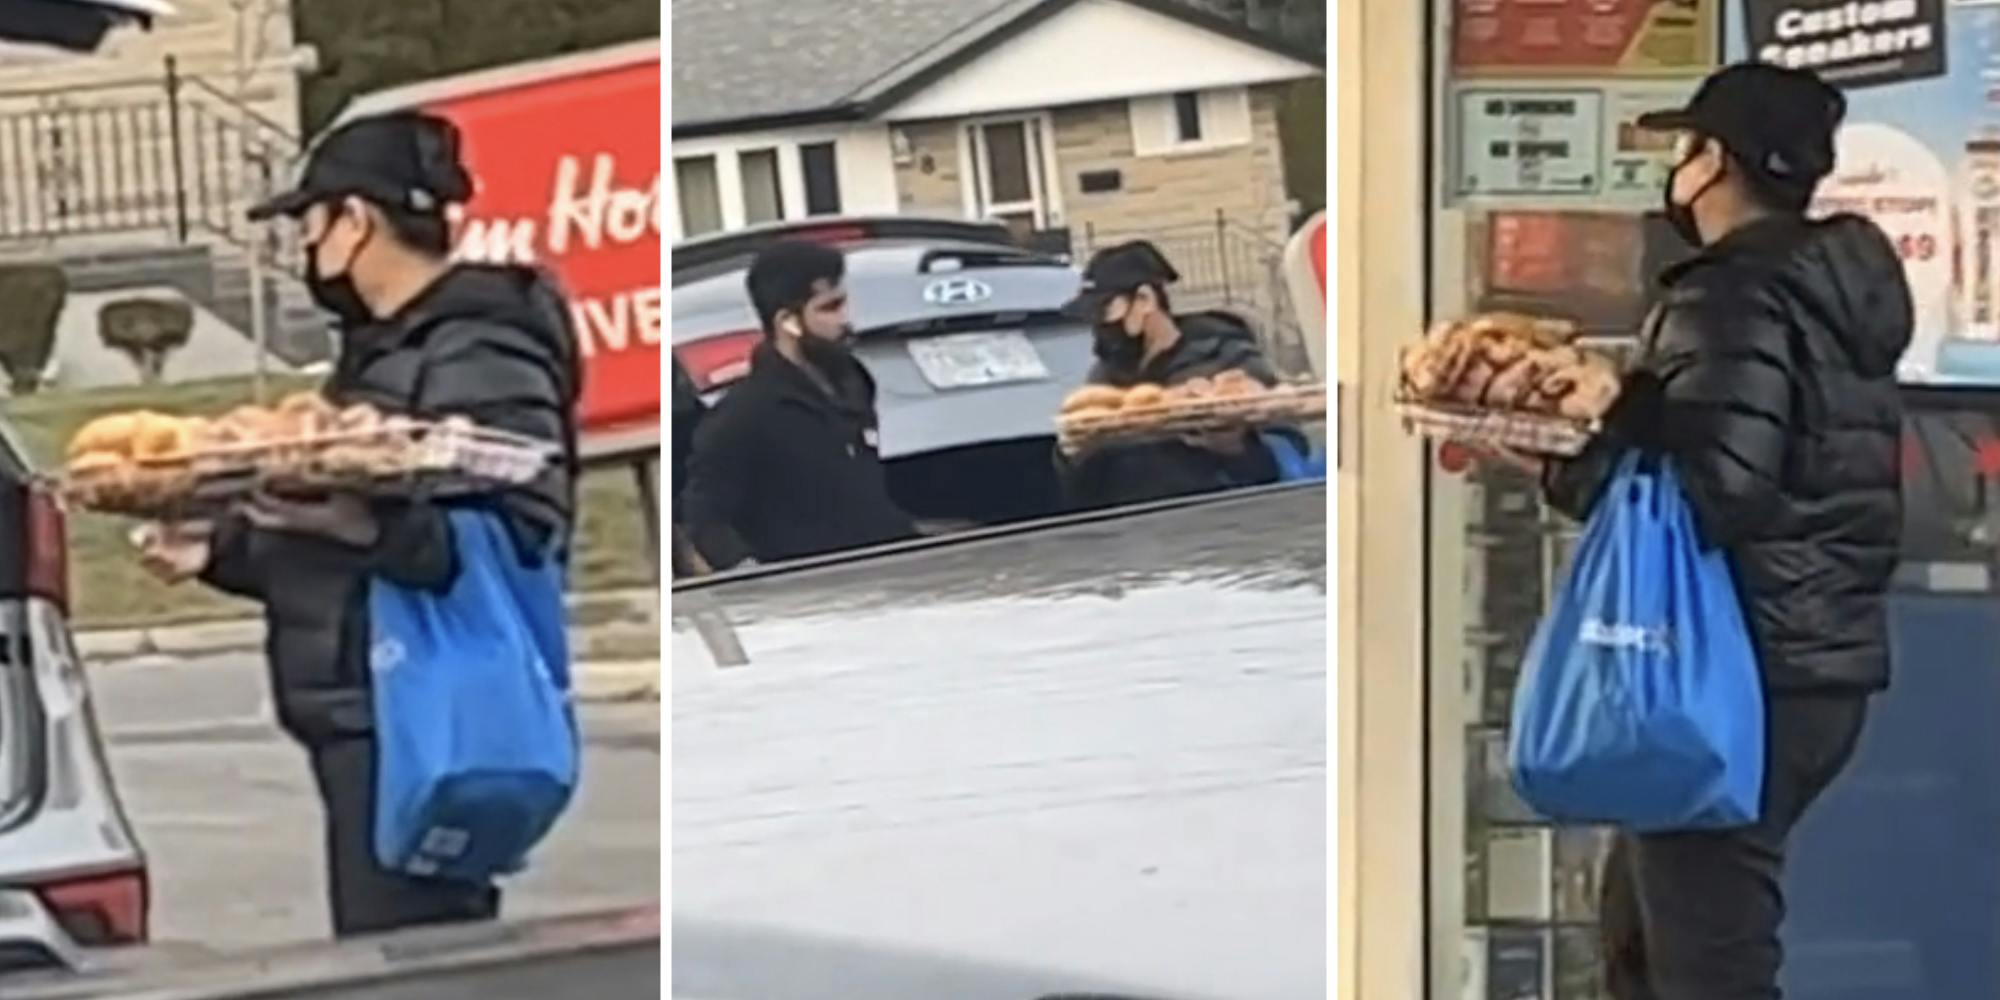 ‘I wont be buying from Tim hortons again’: Customer catches Tim Hortons workers unloading donuts from van. There’s just 1 problem